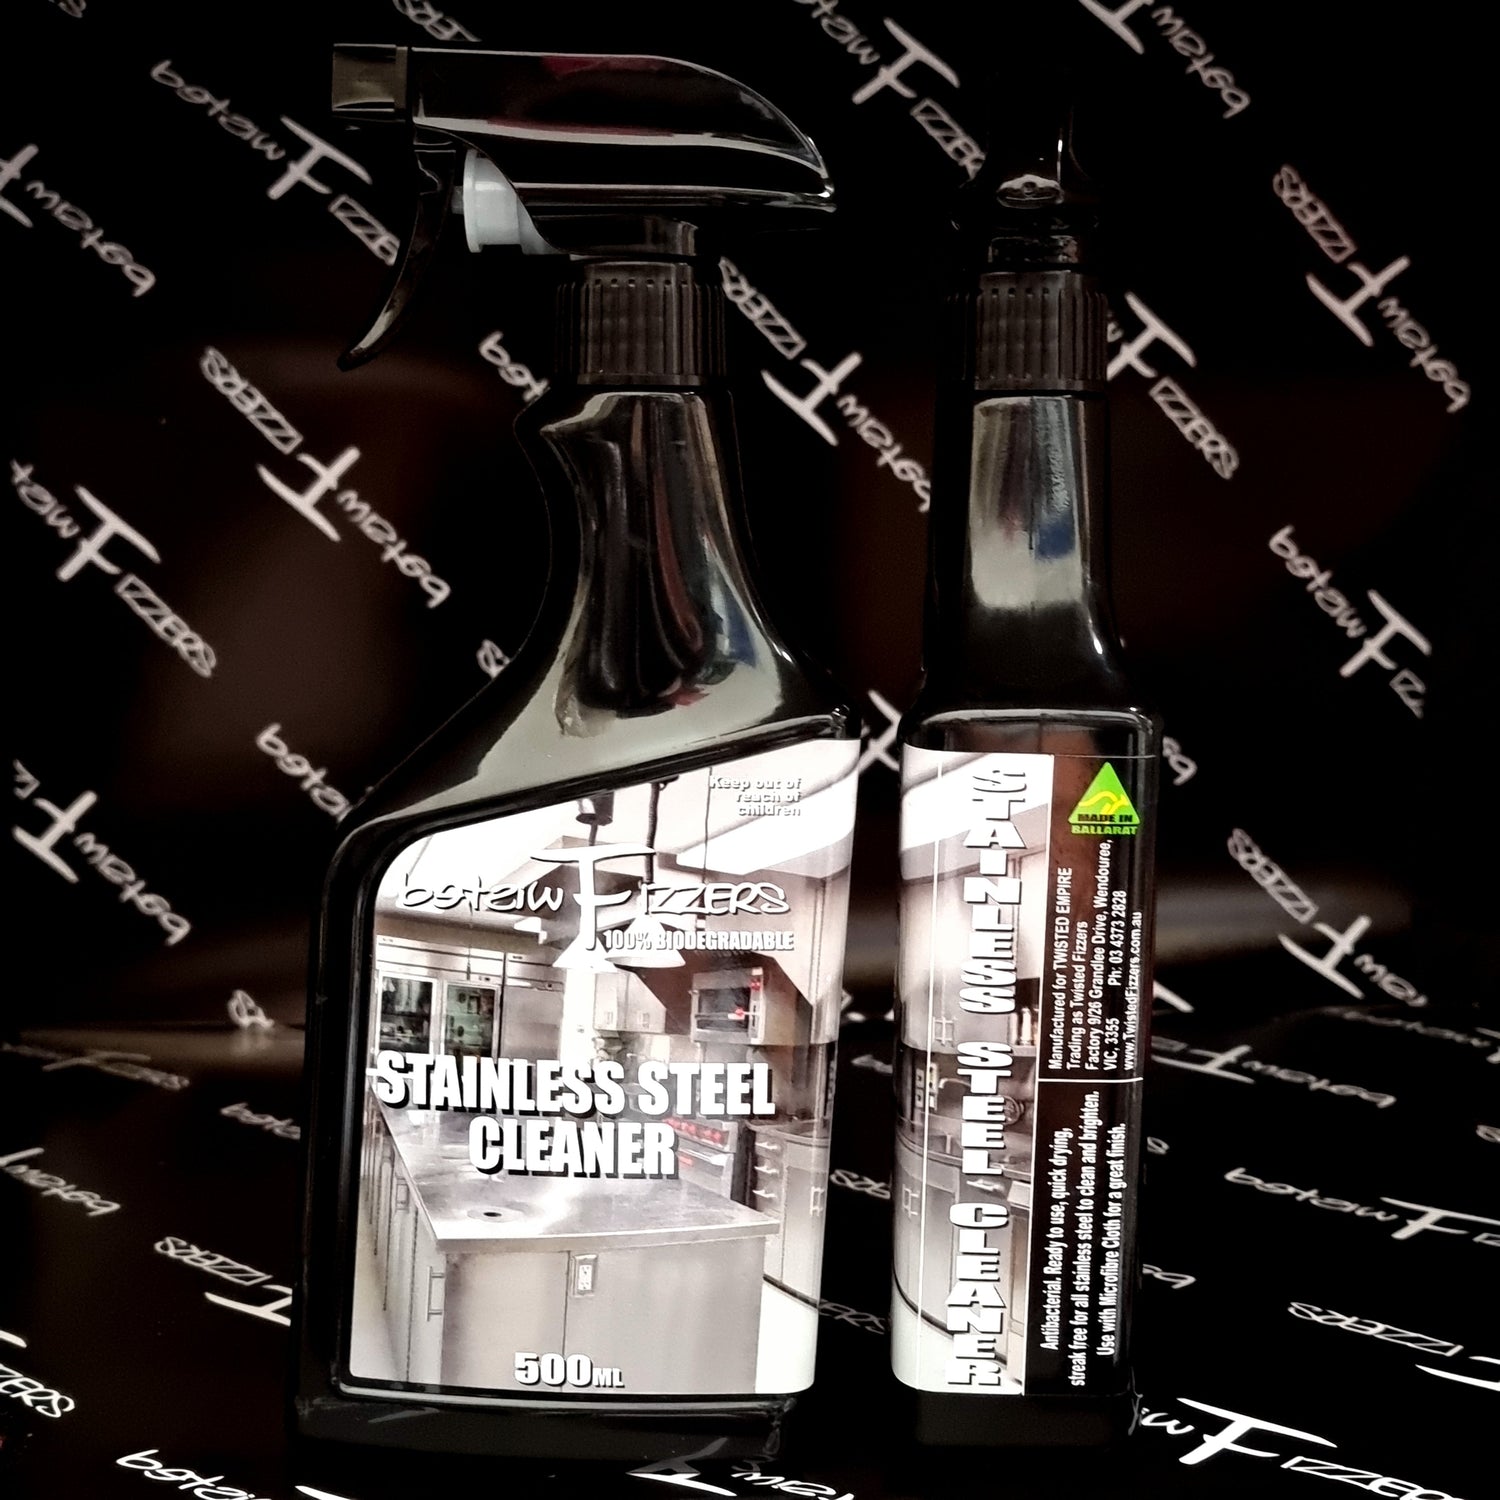 Stainless Steal Cleaner